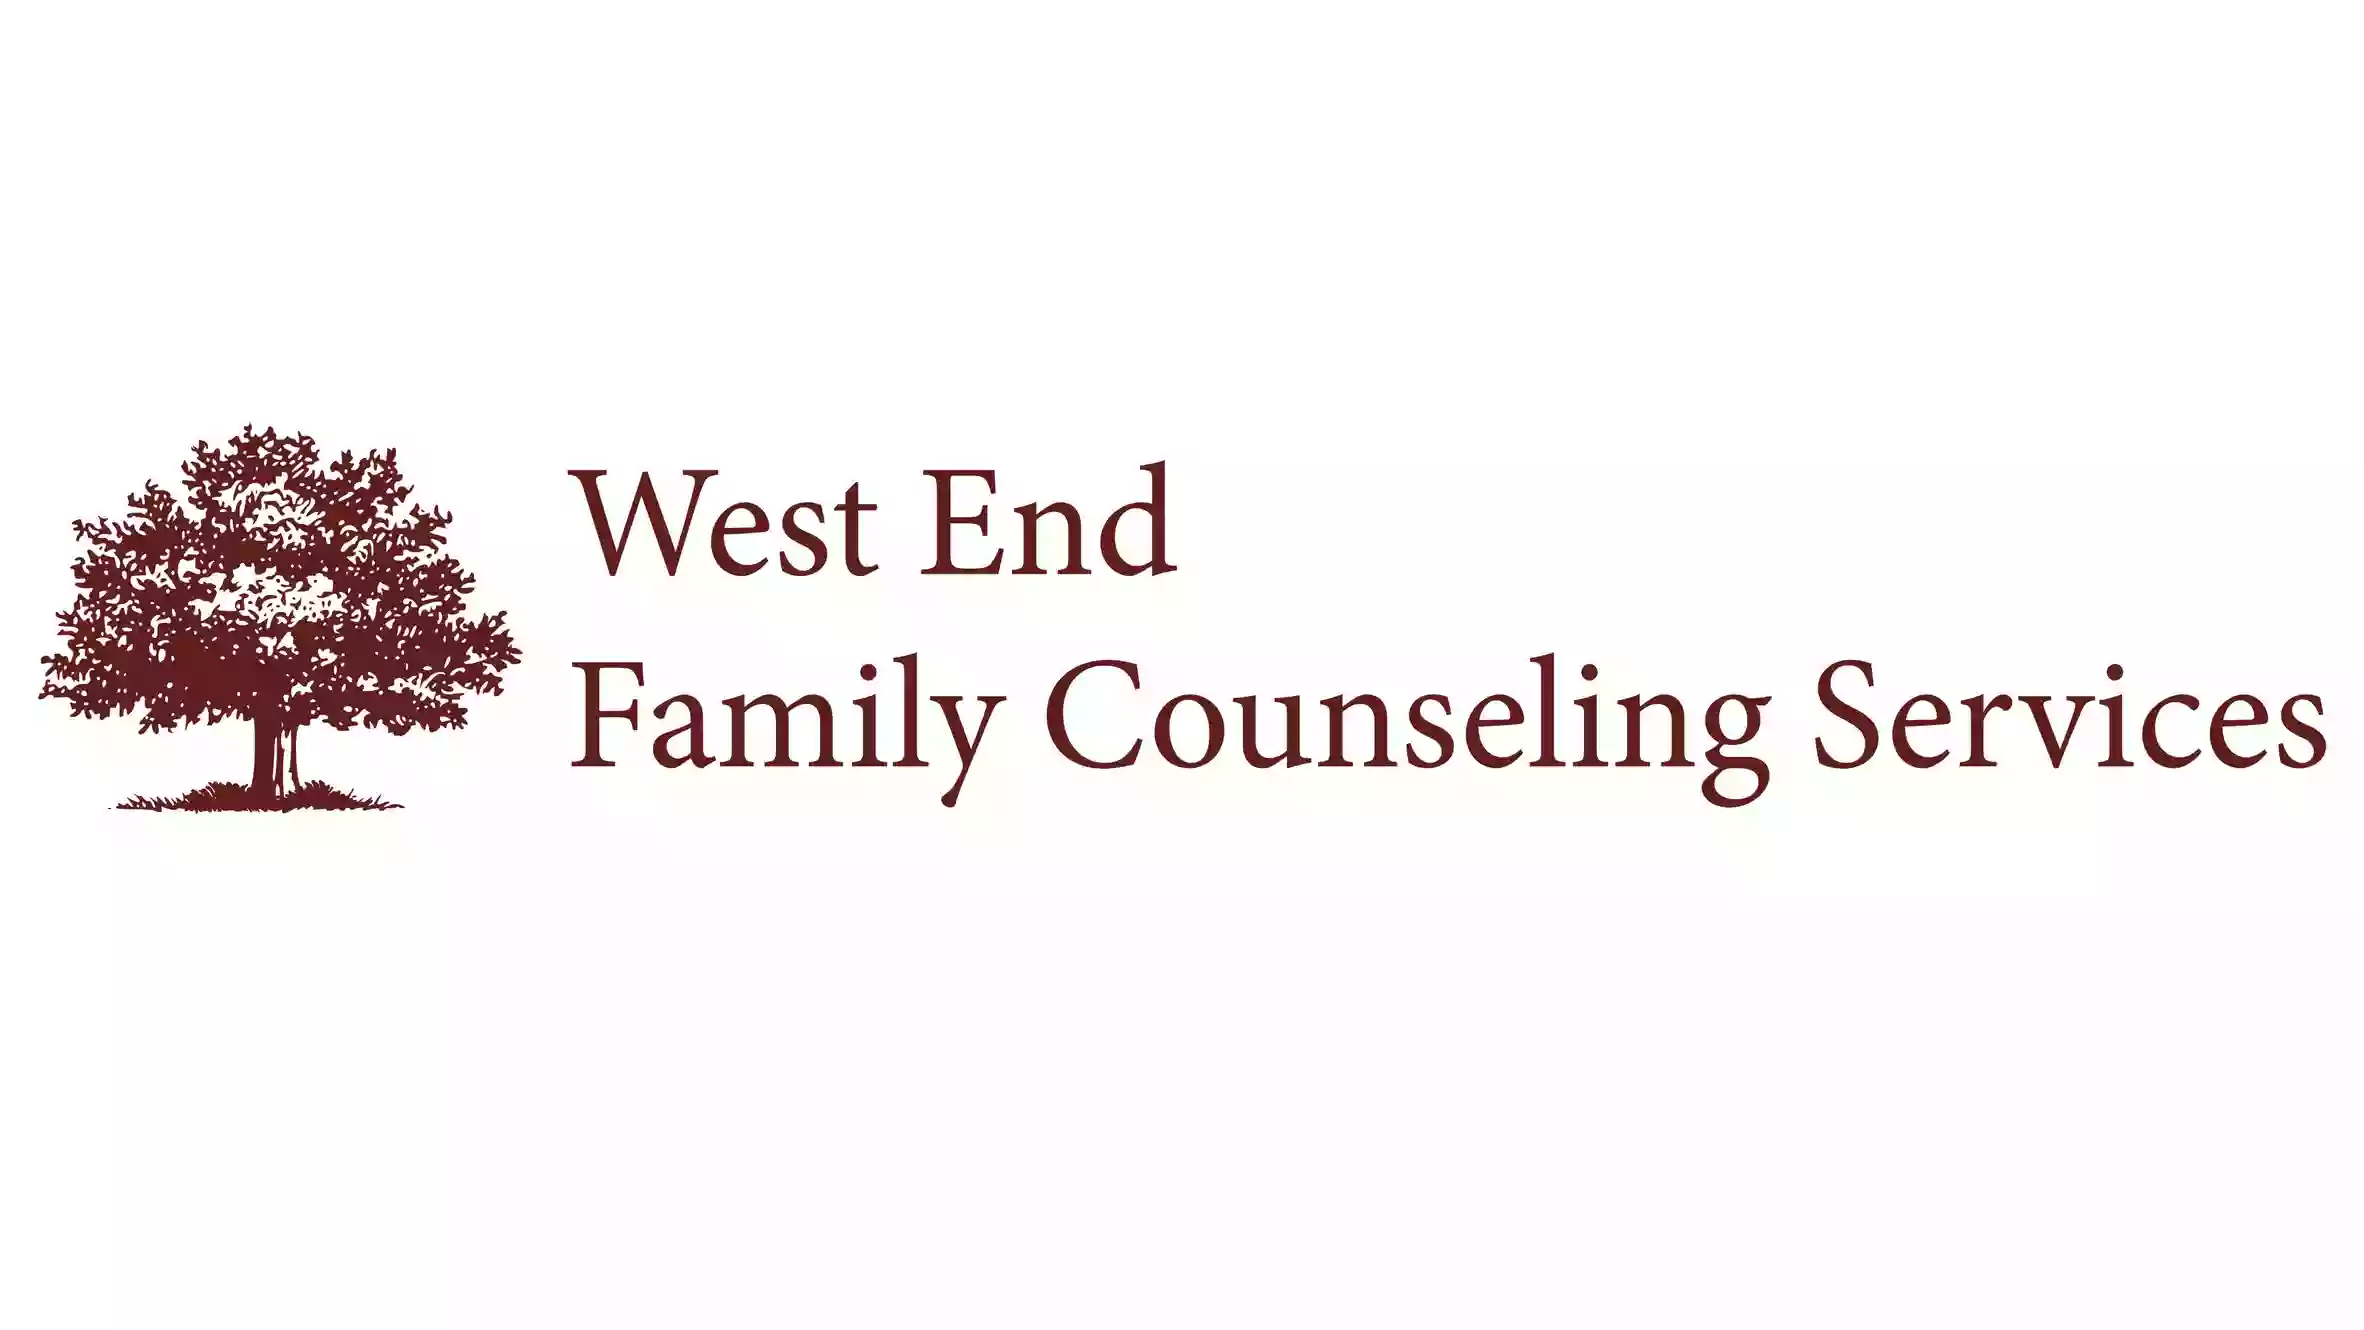 West End Family Counseling Services